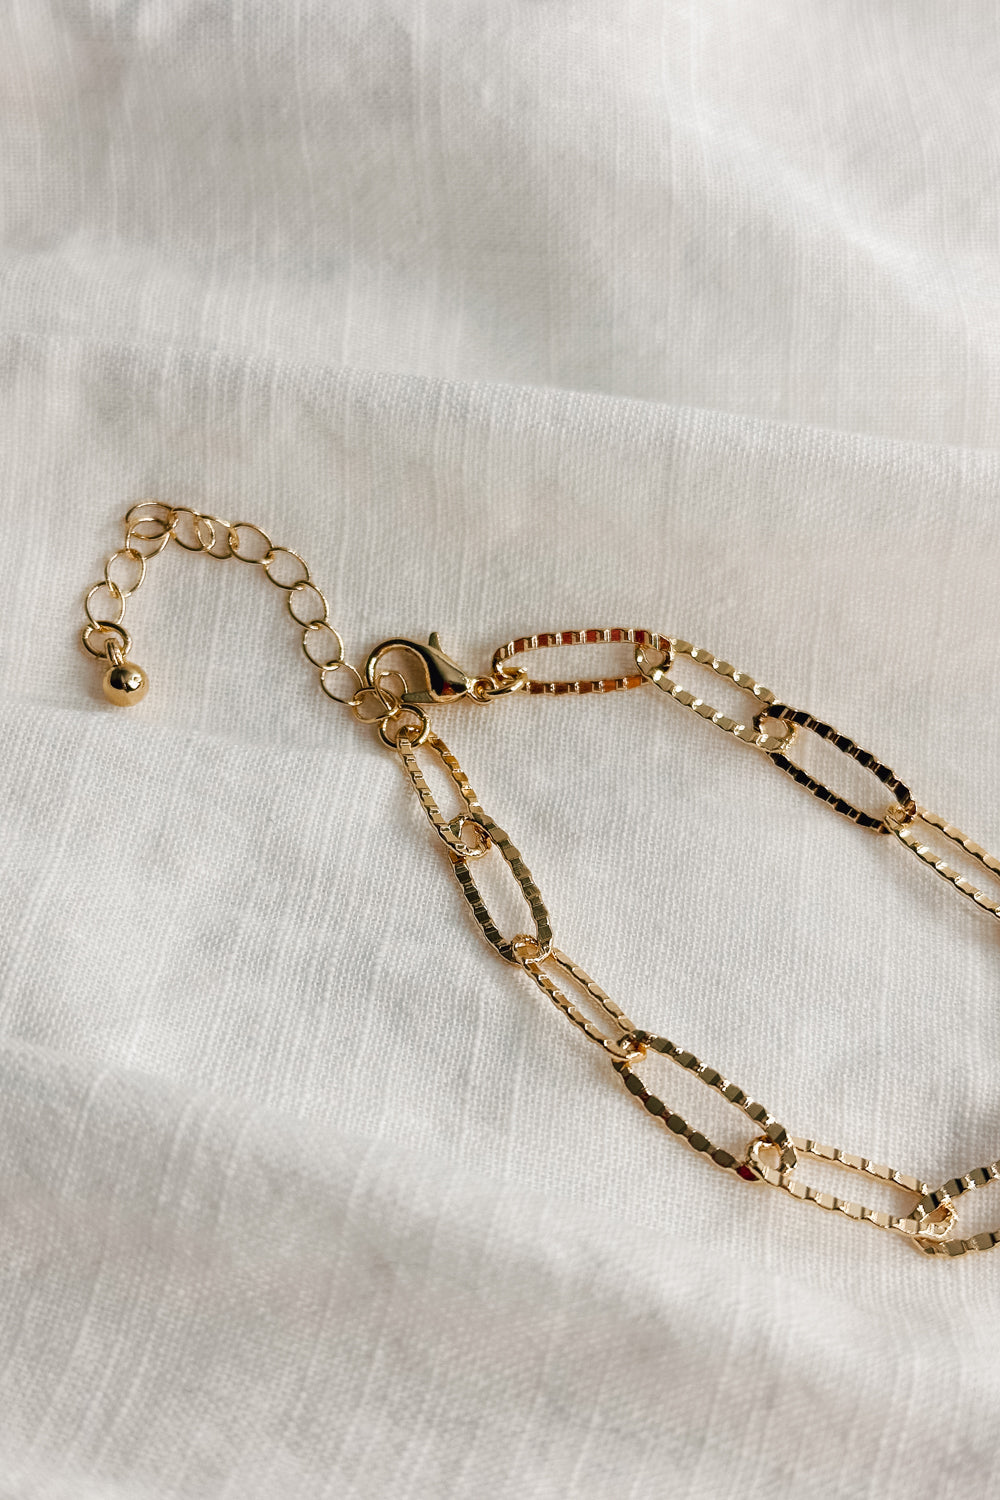 Image shows the Bethany Gold Textured Chain Link Bracelet against a white background. Bracelet has gold textured oval links.